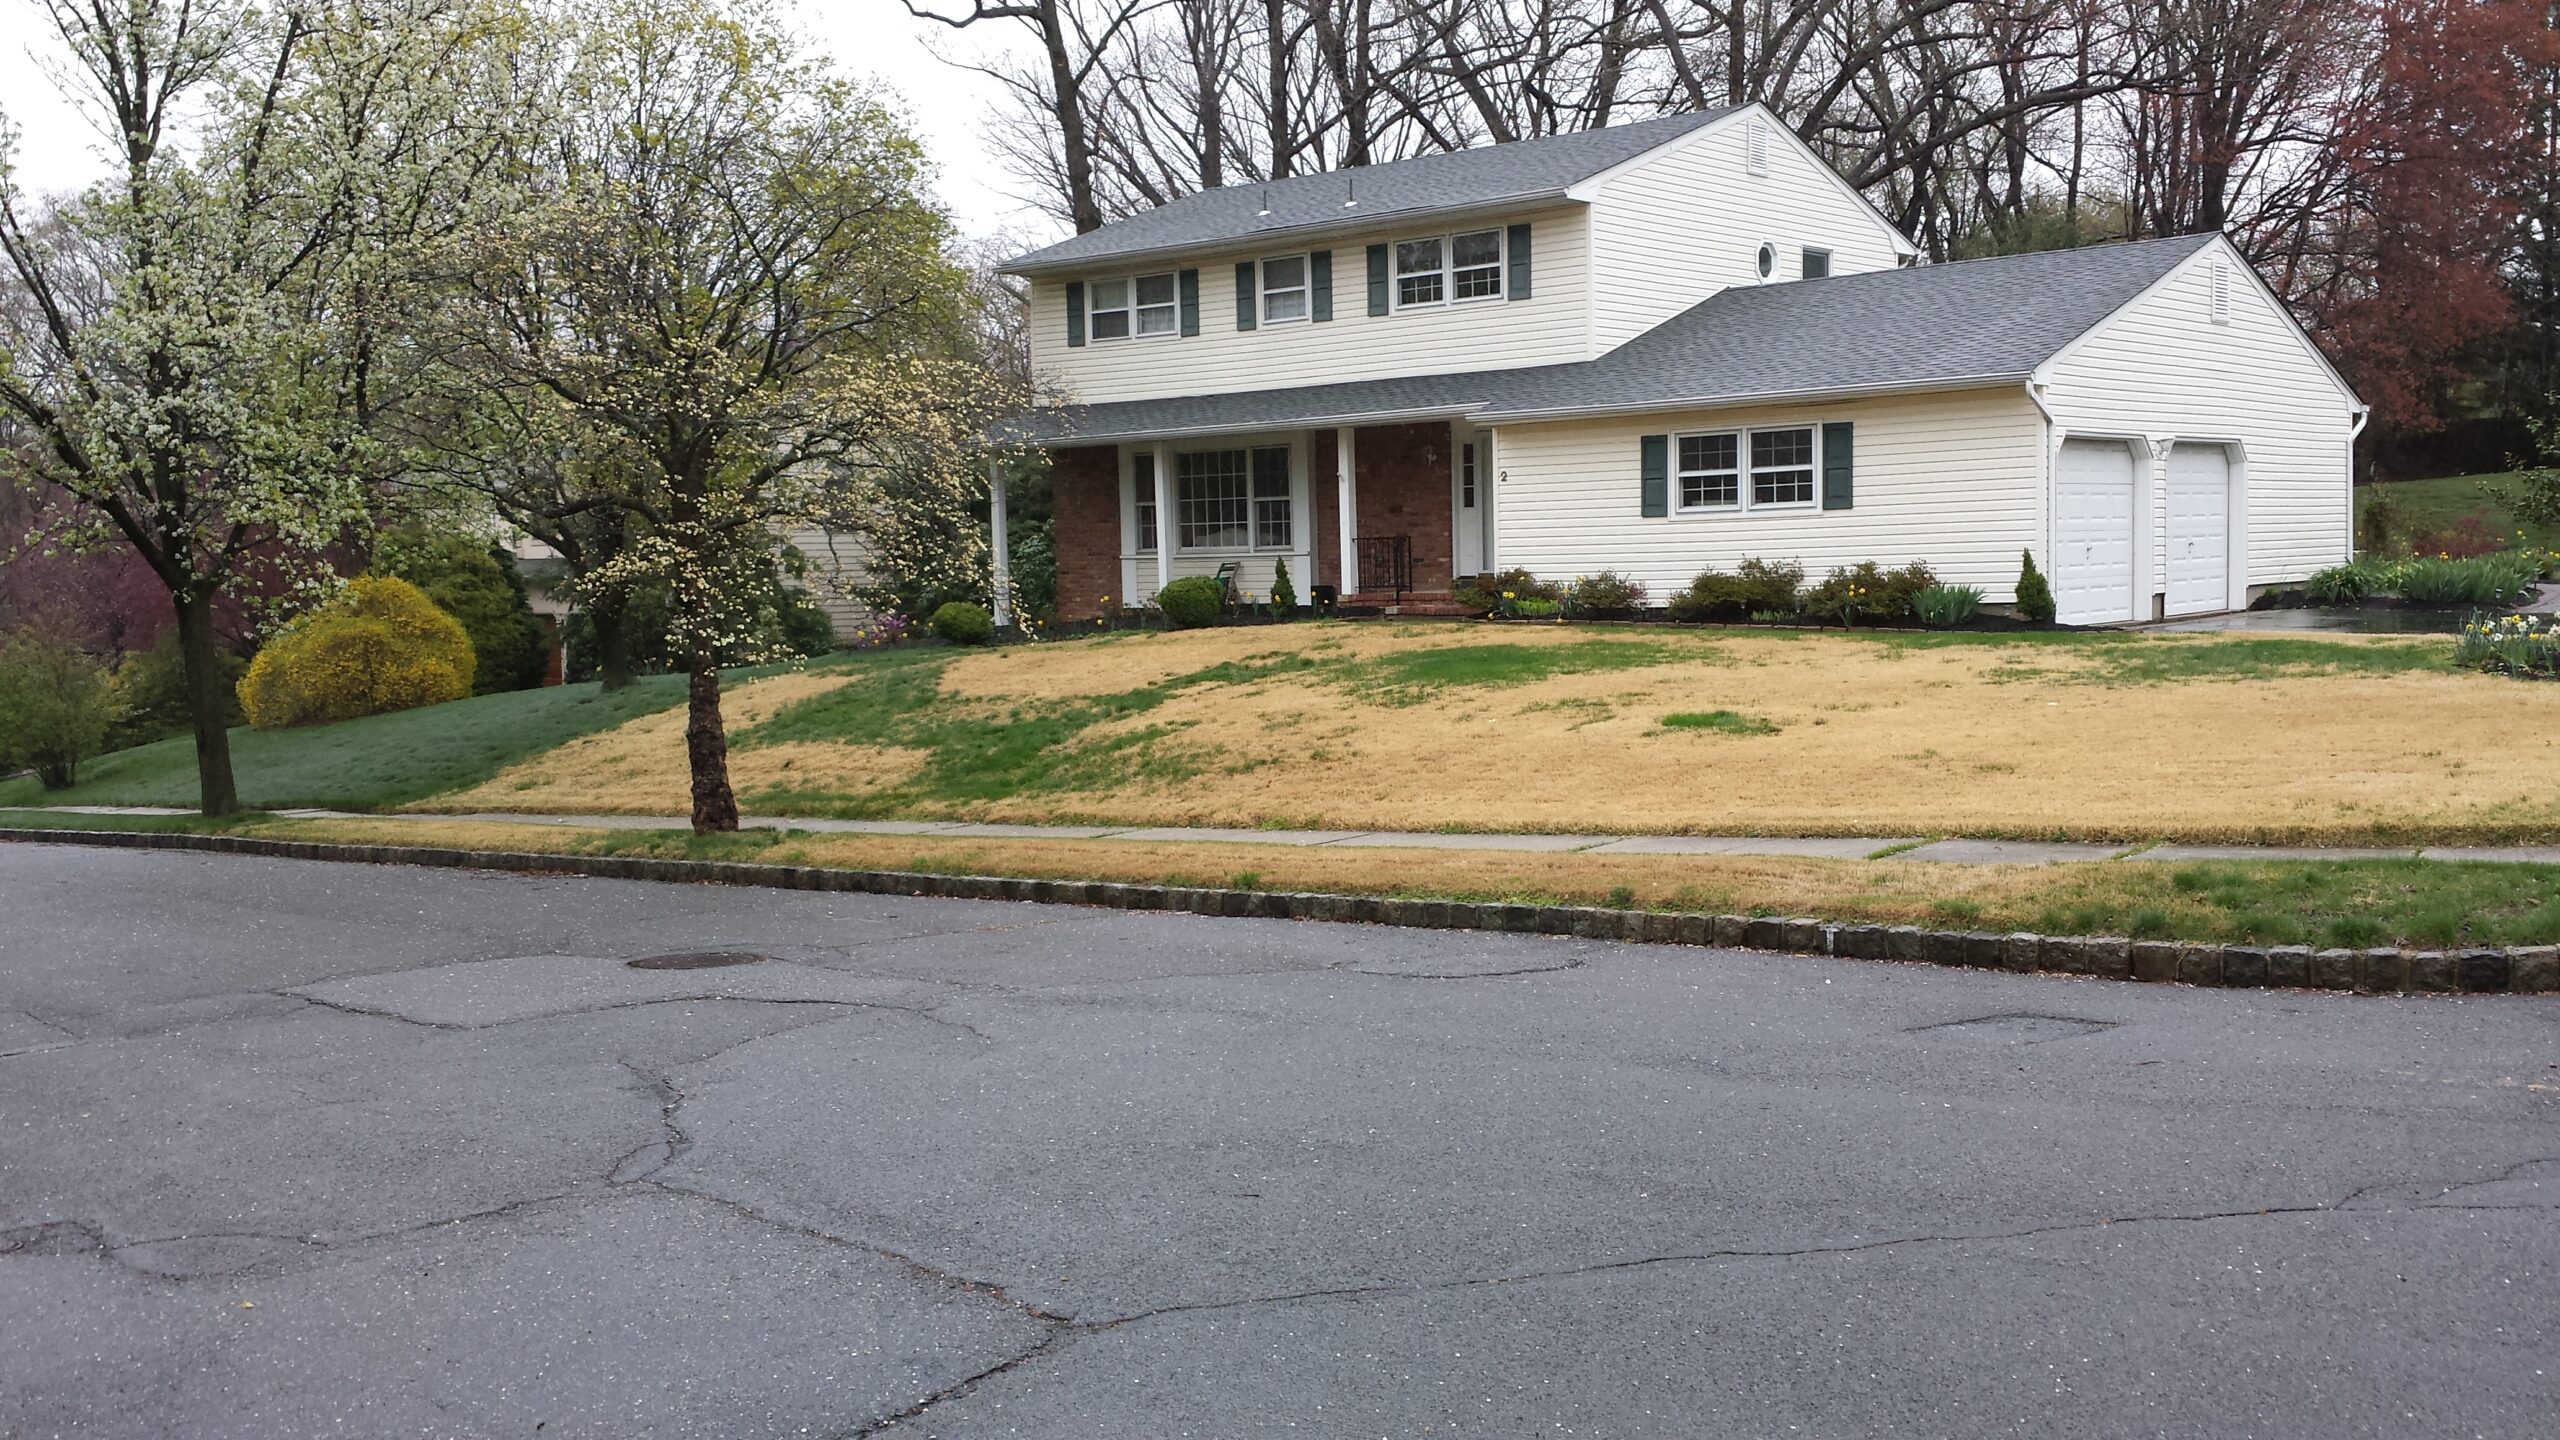 Dormant zoysiagrass with patches of perennial ryegrass in a home lawn.